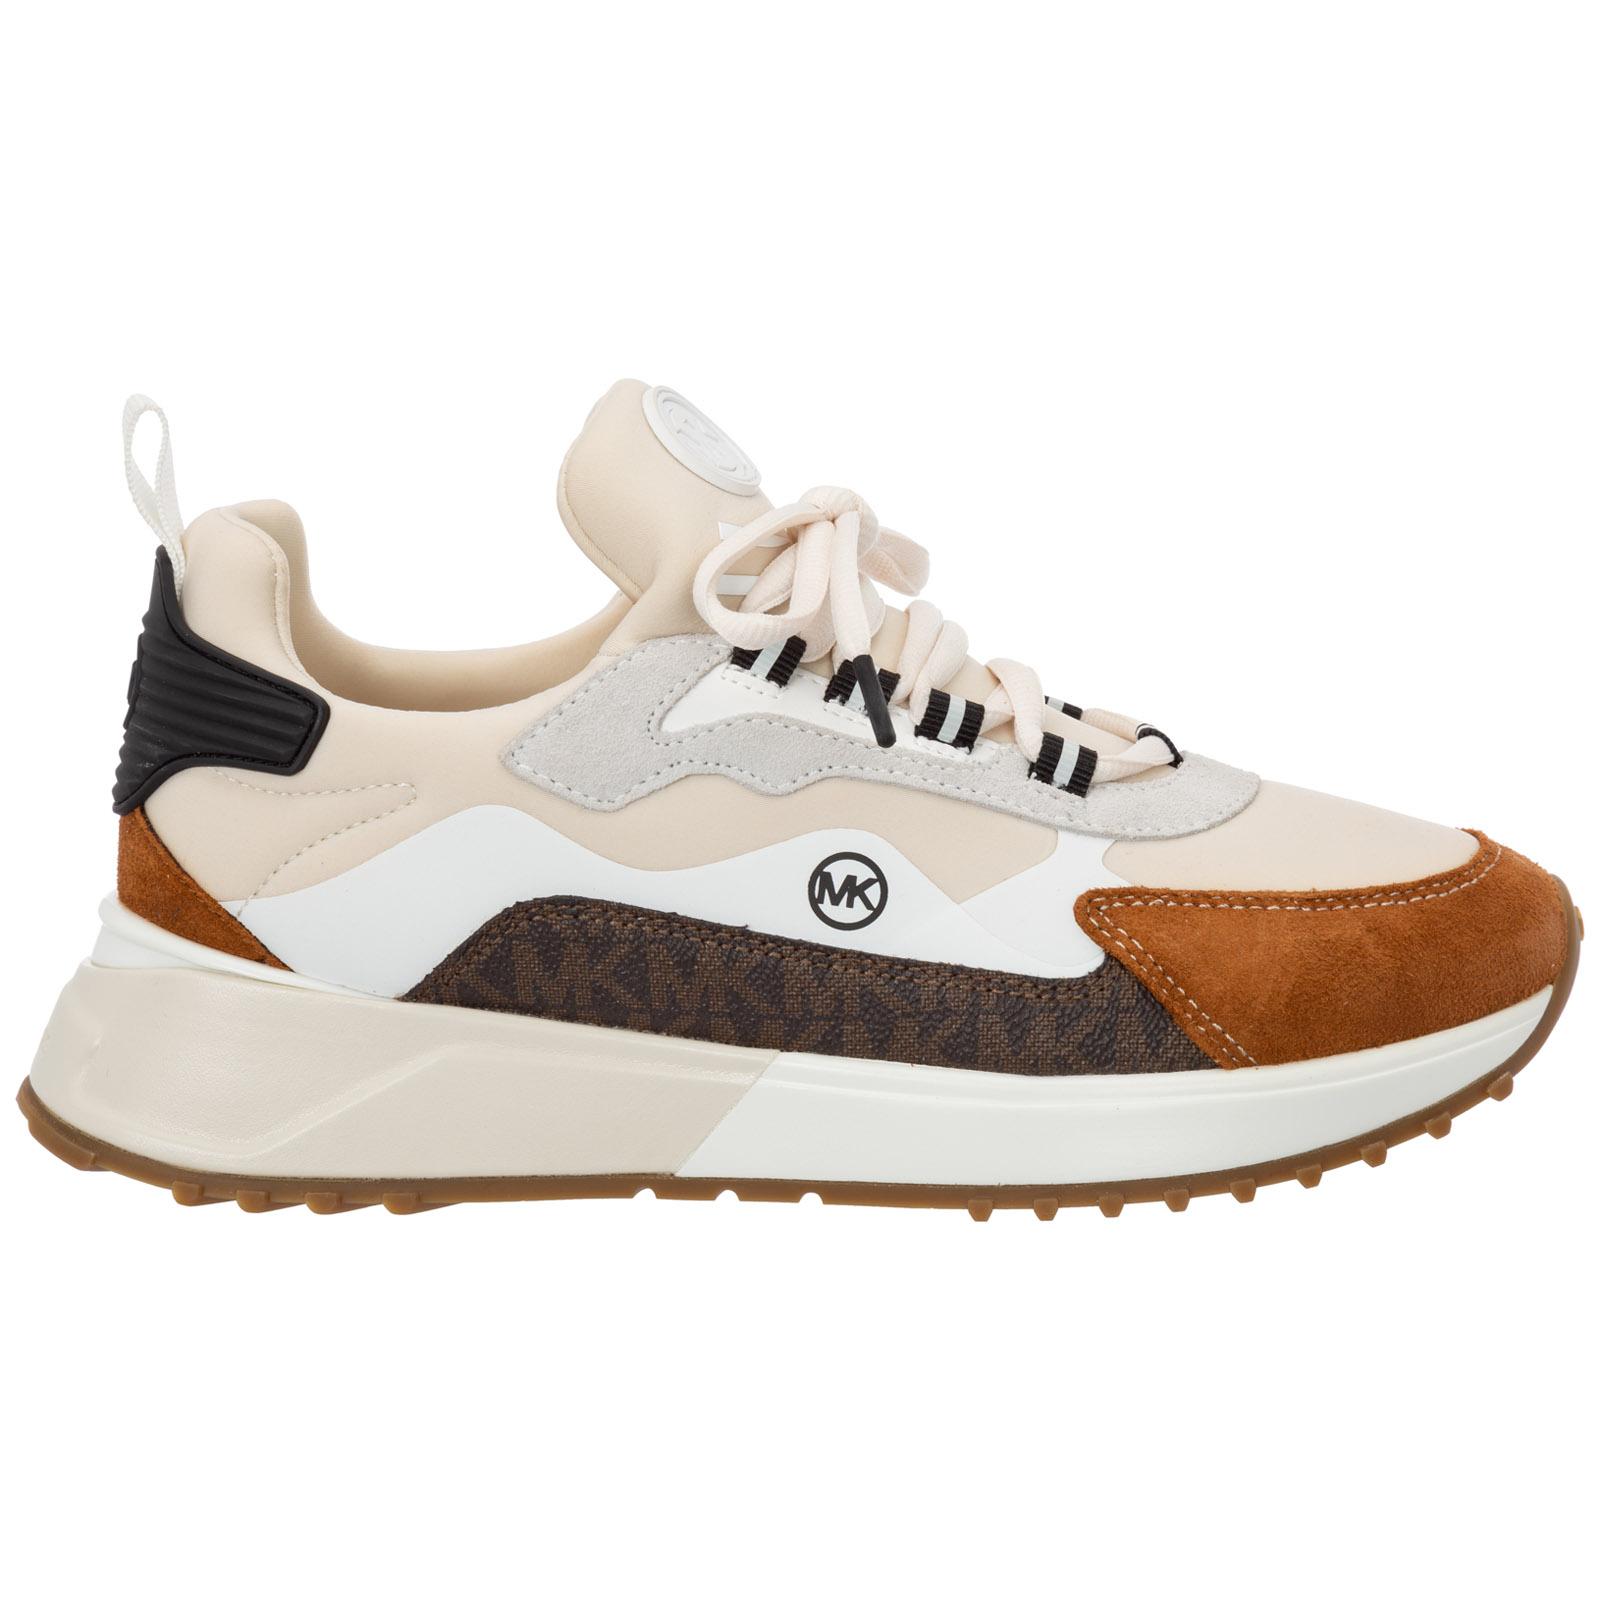 Michael Kors Shoes Leather Trainers Sneakers Theo Sport in Natural | Lyst  Australia